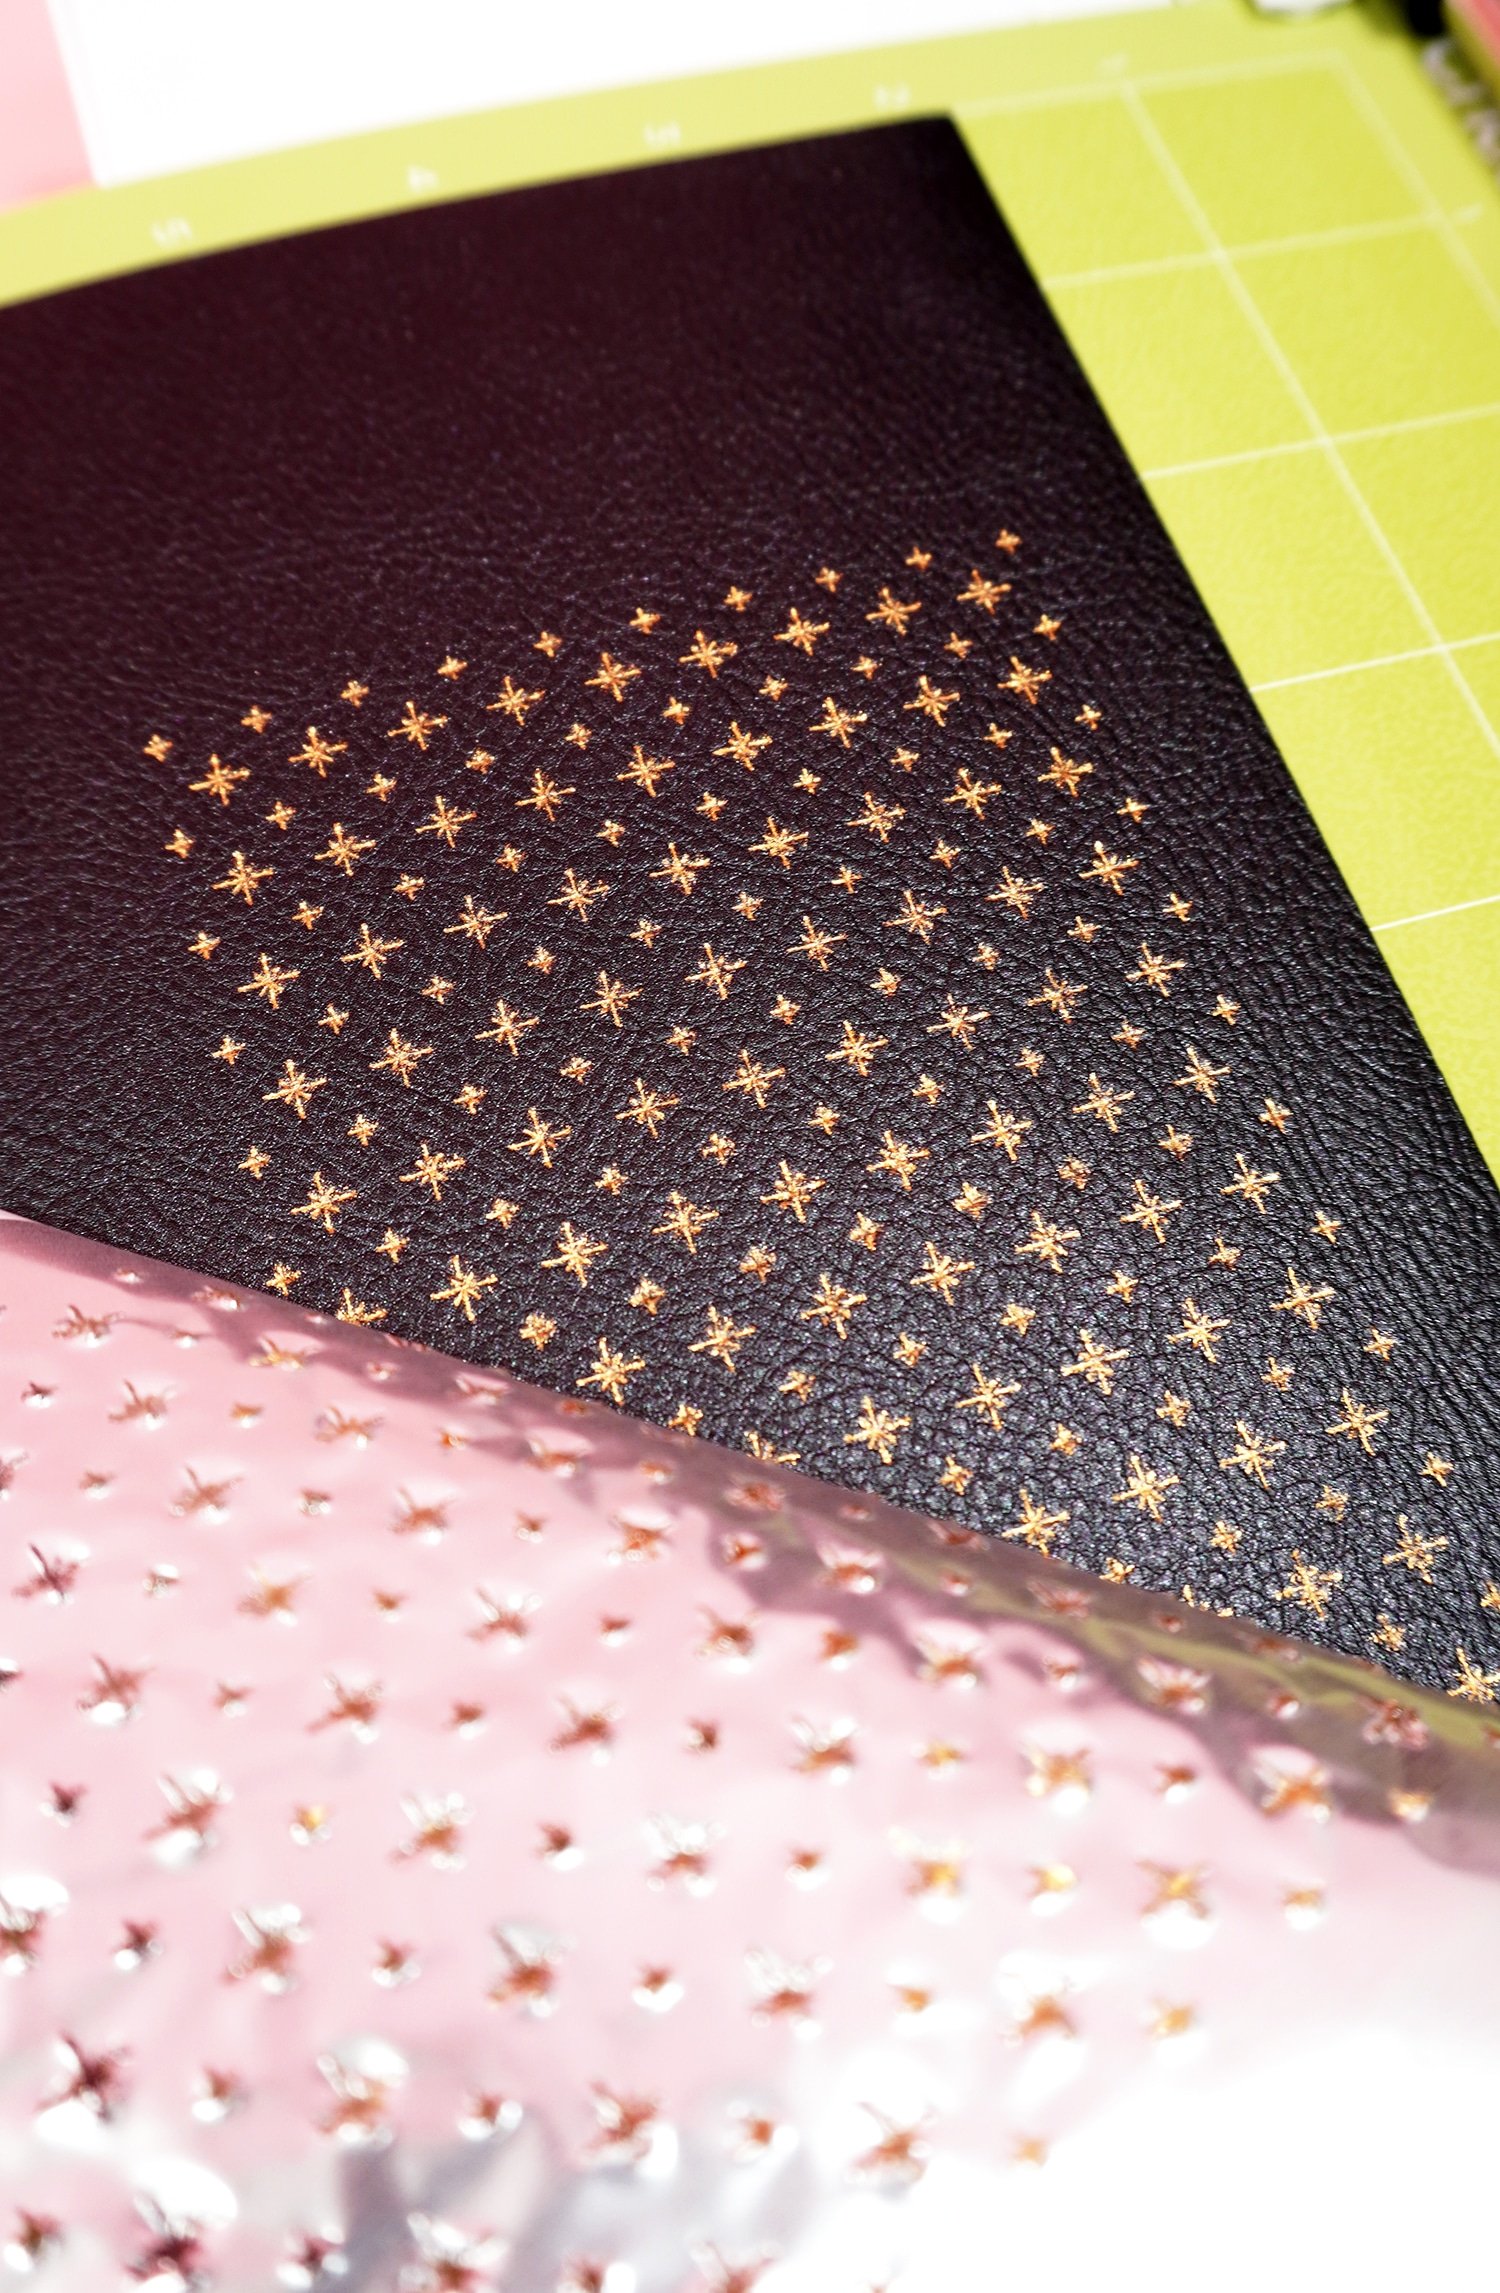 Peeling back gold foil from black faux leather to reveal star design